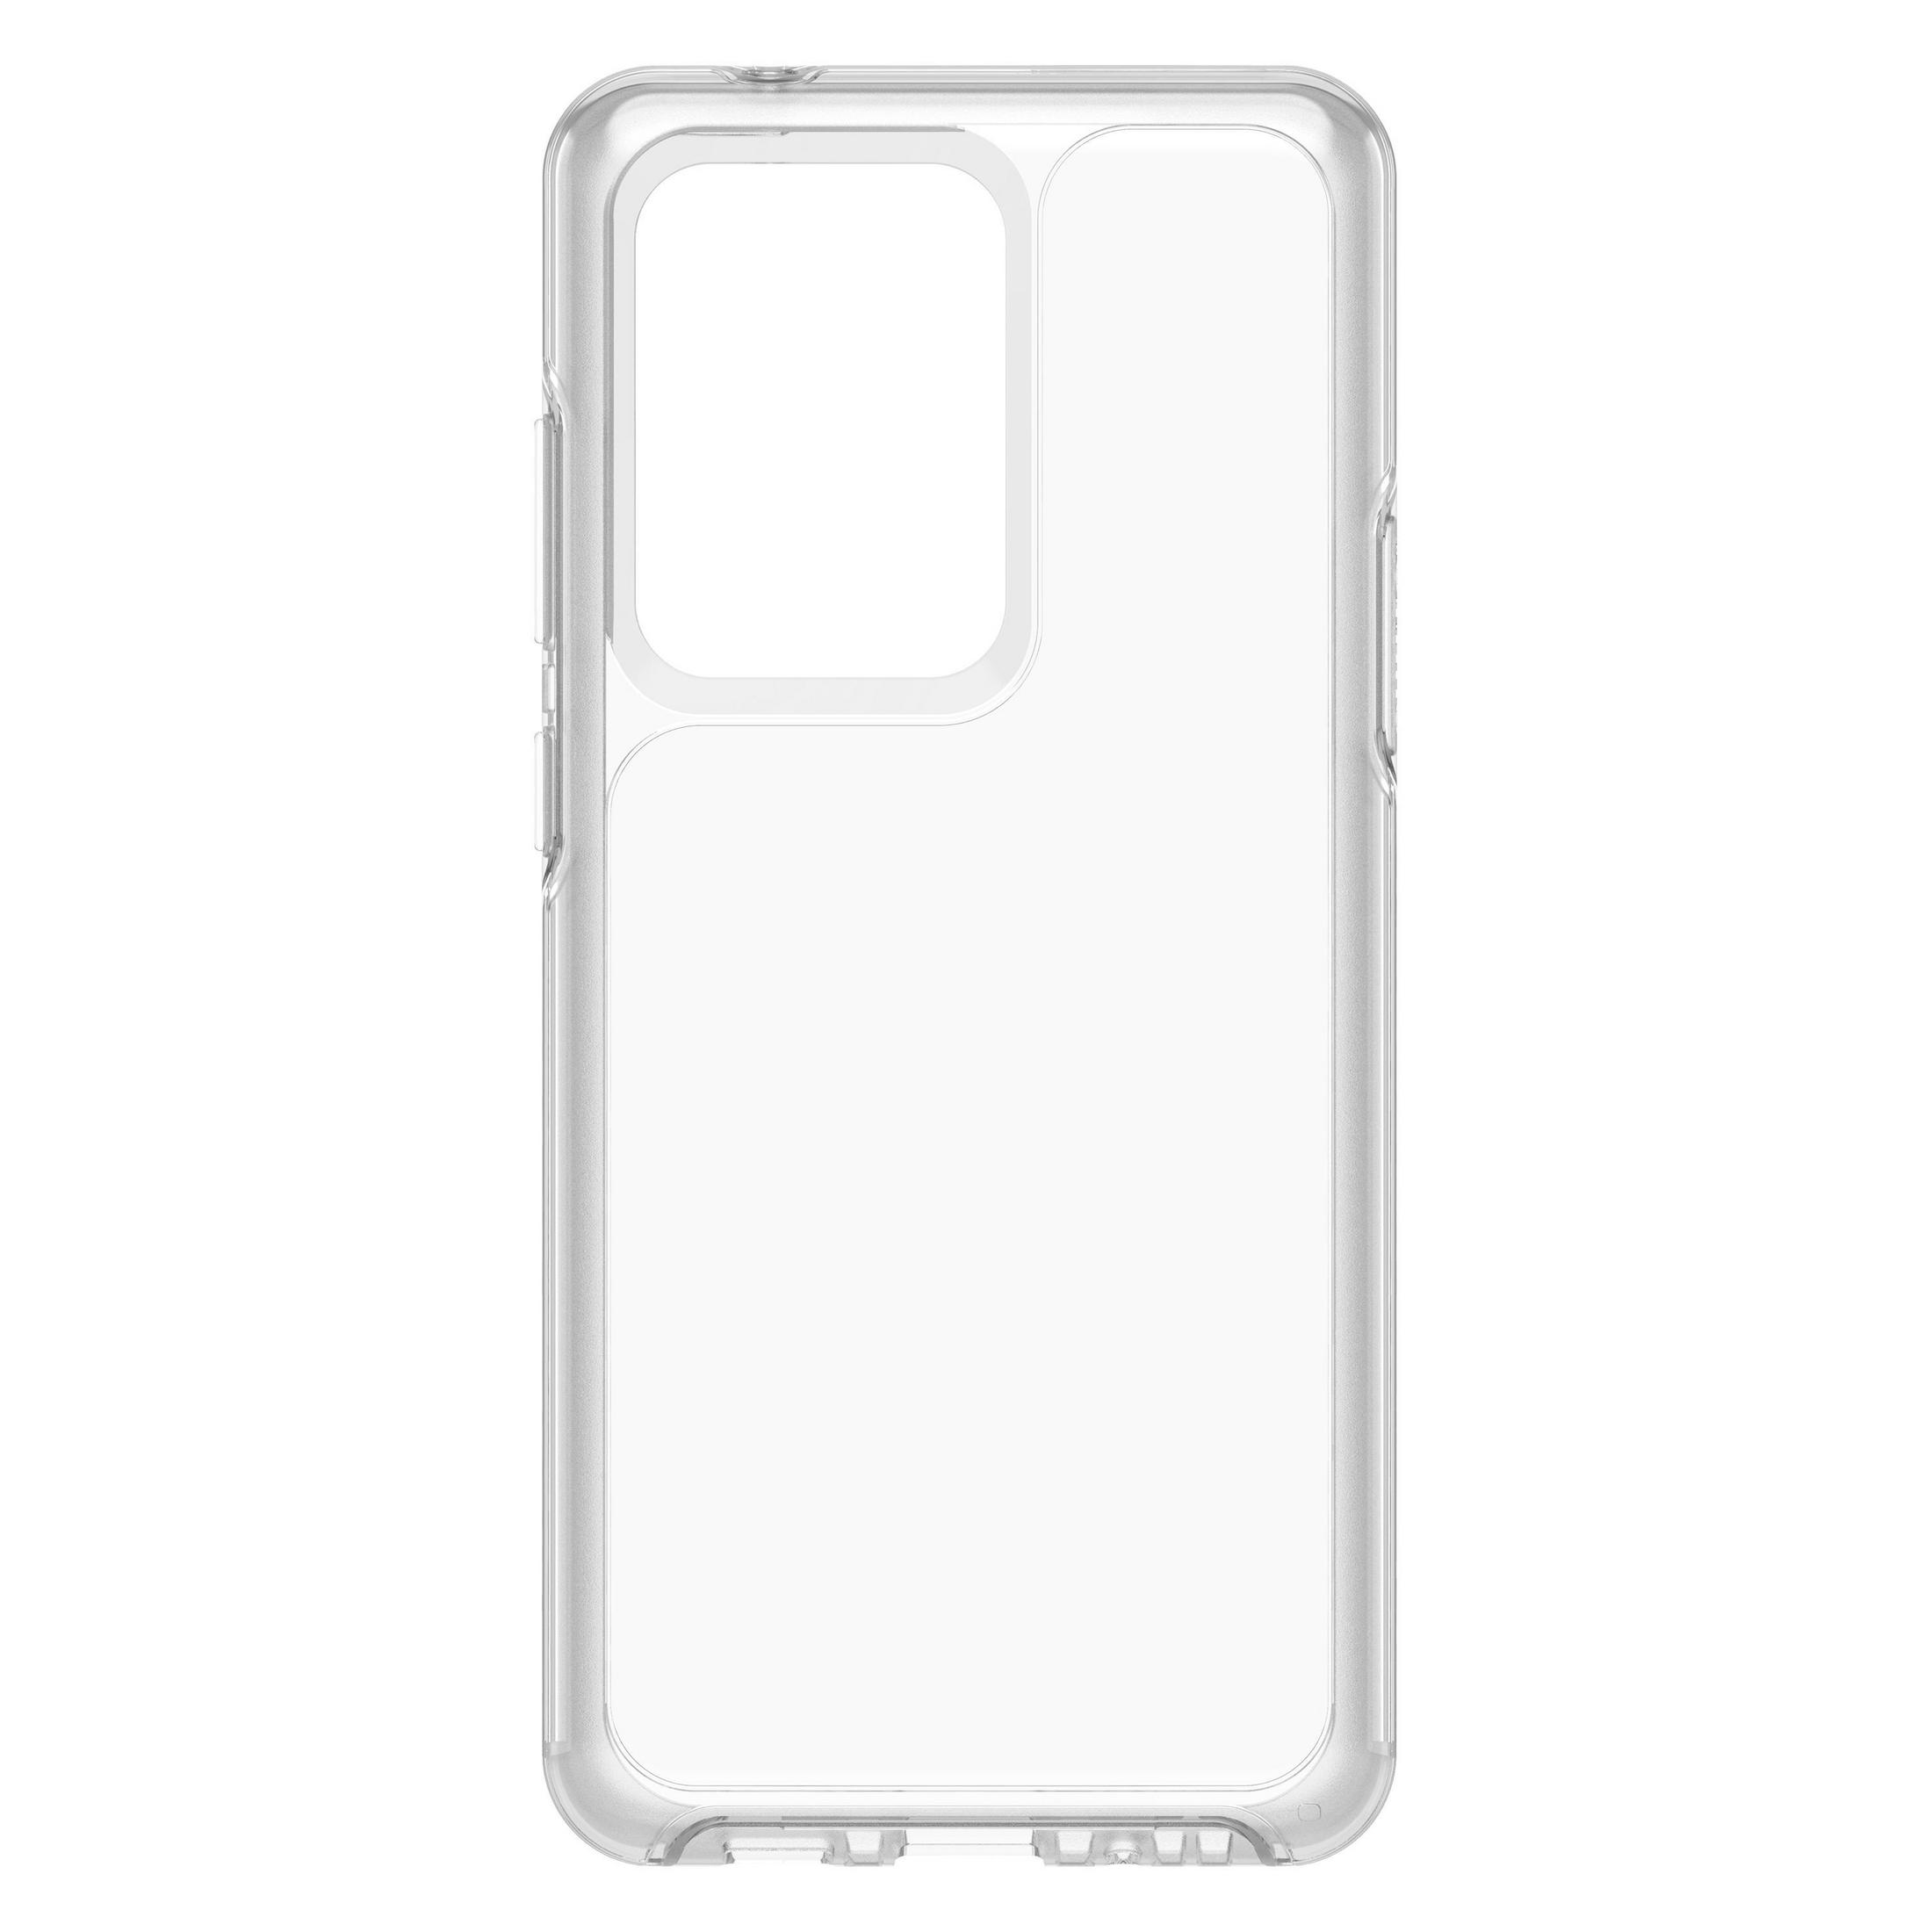 Transparent ULTRA Backcover, CLEAR, S20 77-64295 SYMMETRY Samsung, S20 Ultra, Galaxy OTTERBOX